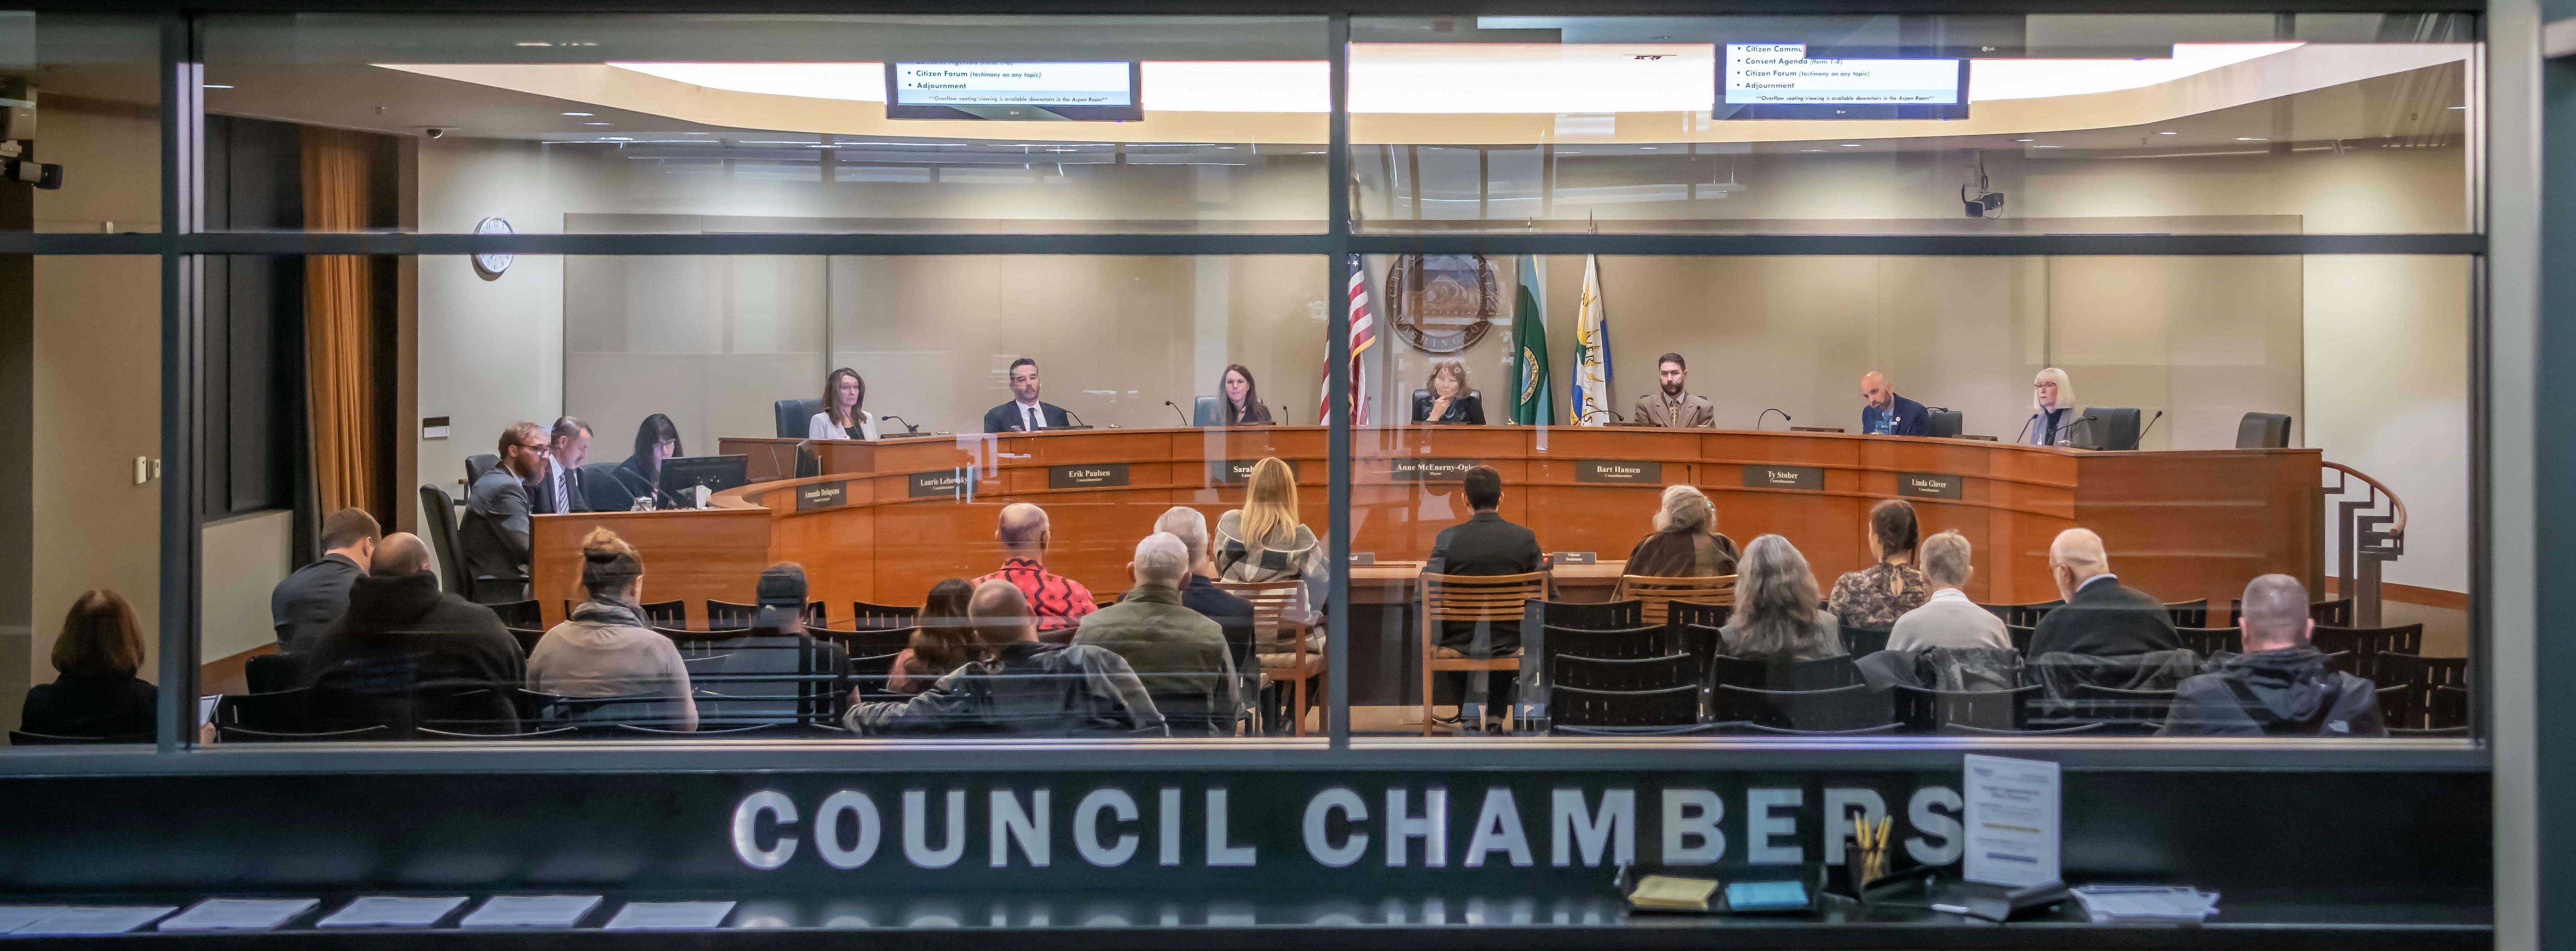 Vancouver City Council Chambers during a city council meeting.